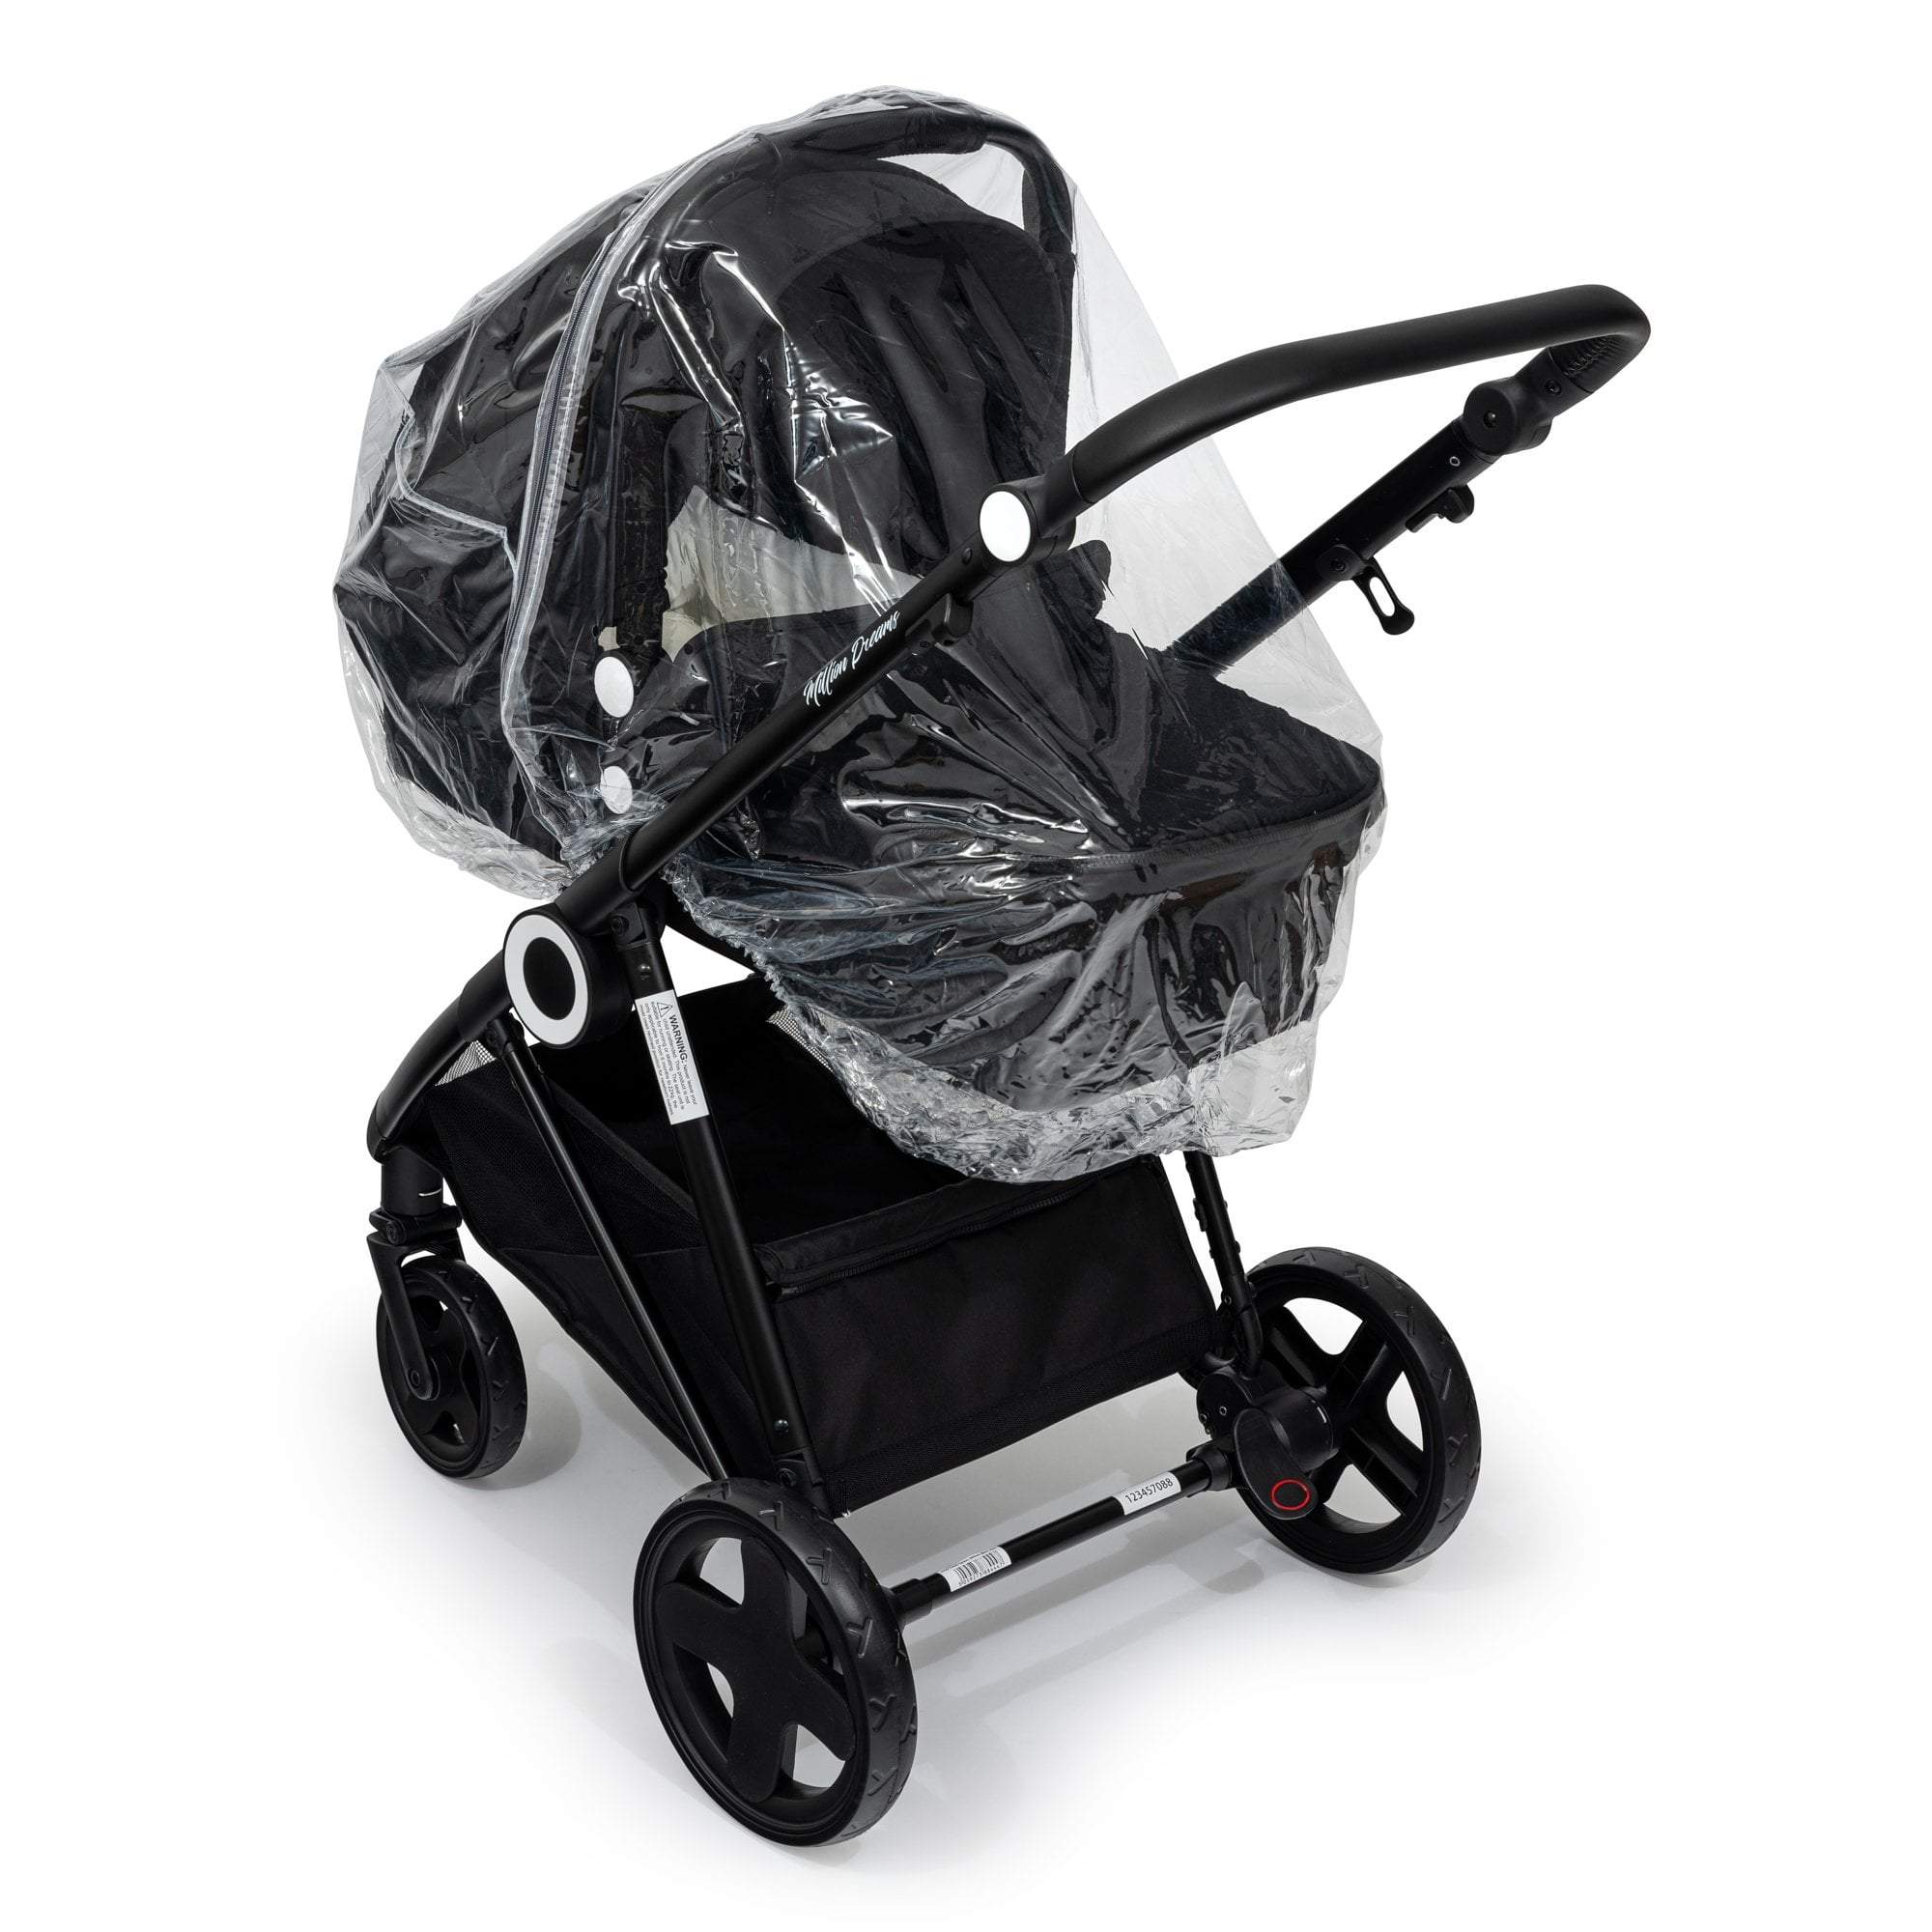 Carrycot Raincover Compatible With BOB - Fits All Models - For Your Little One